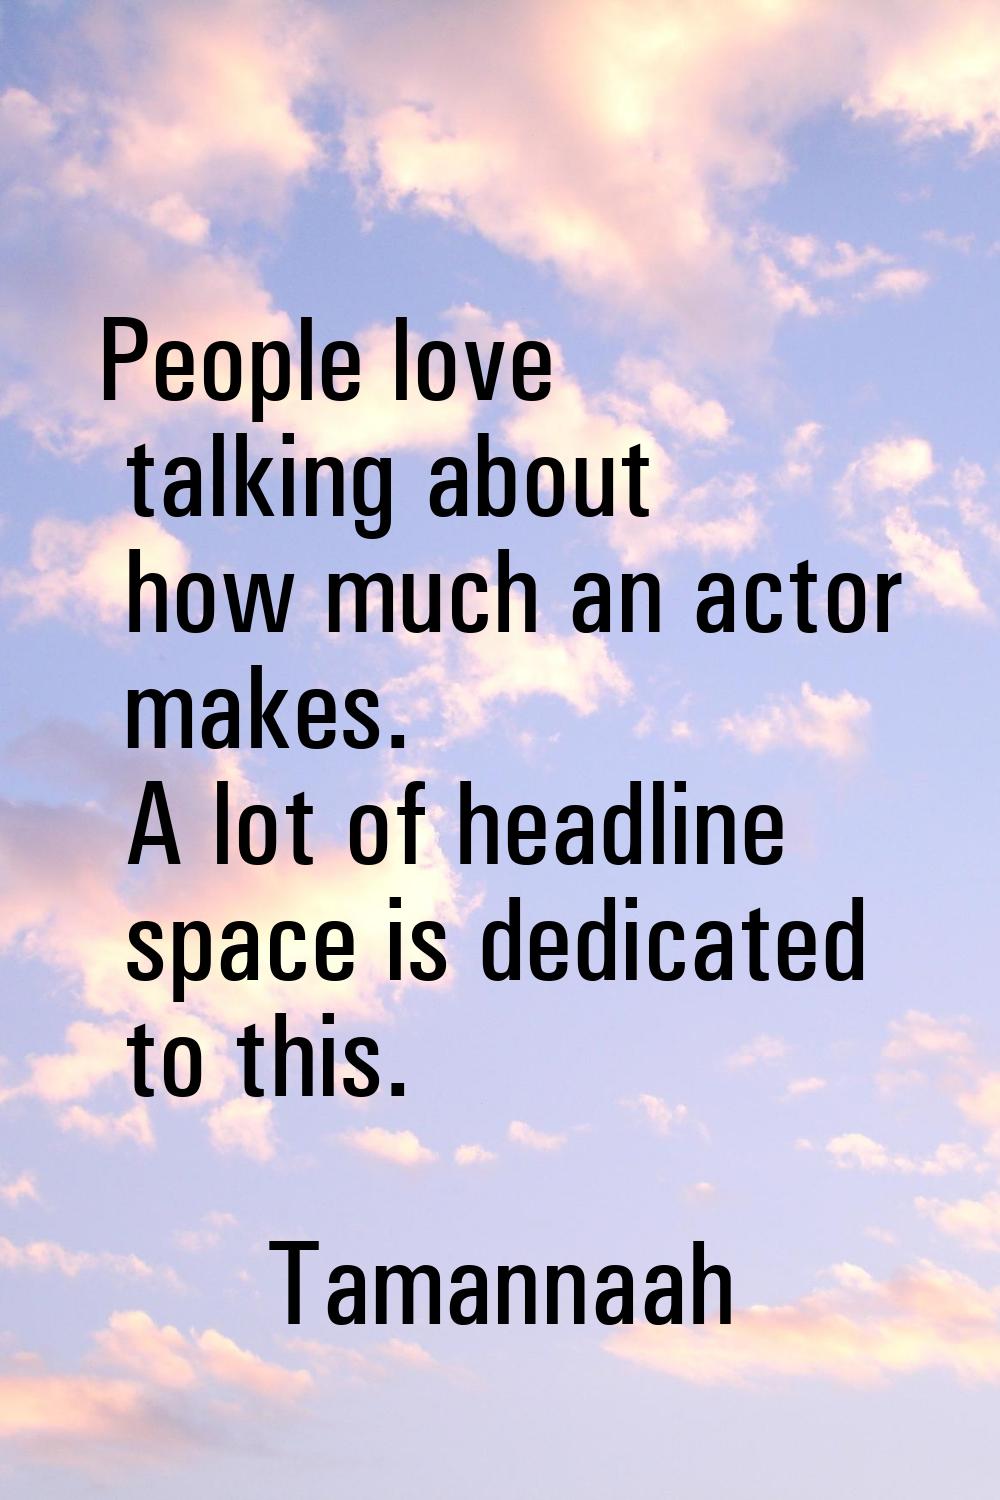 People love talking about how much an actor makes. A lot of headline space is dedicated to this.